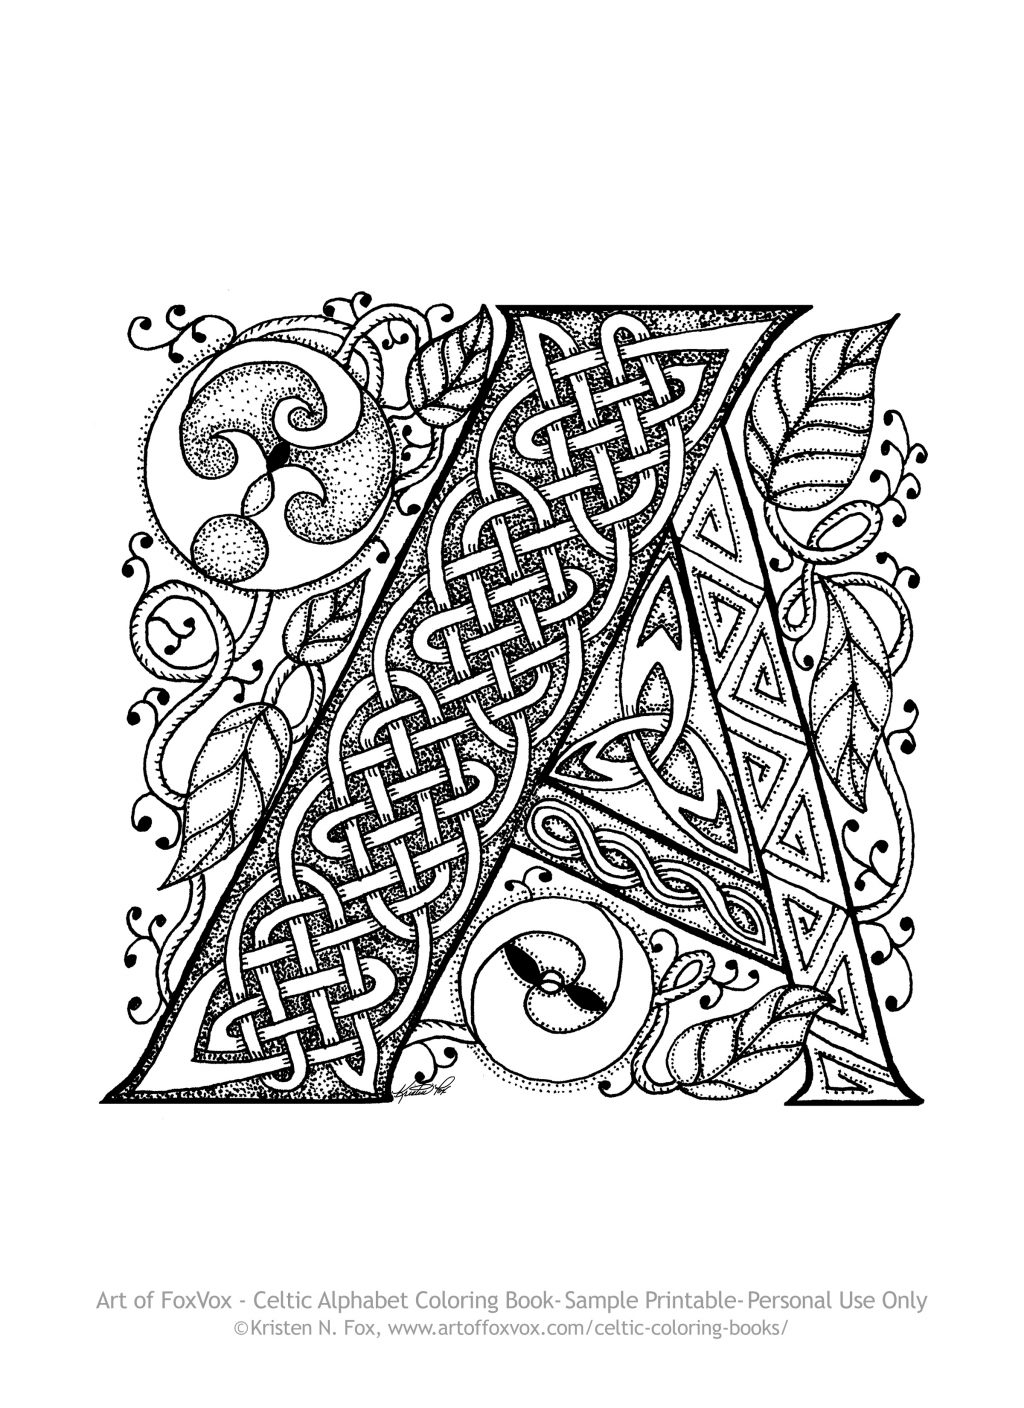 Illuminated Alphabet Coloring Pages Coloring Ideas Celticalphabetcoloringbook Letterasampleprintable1